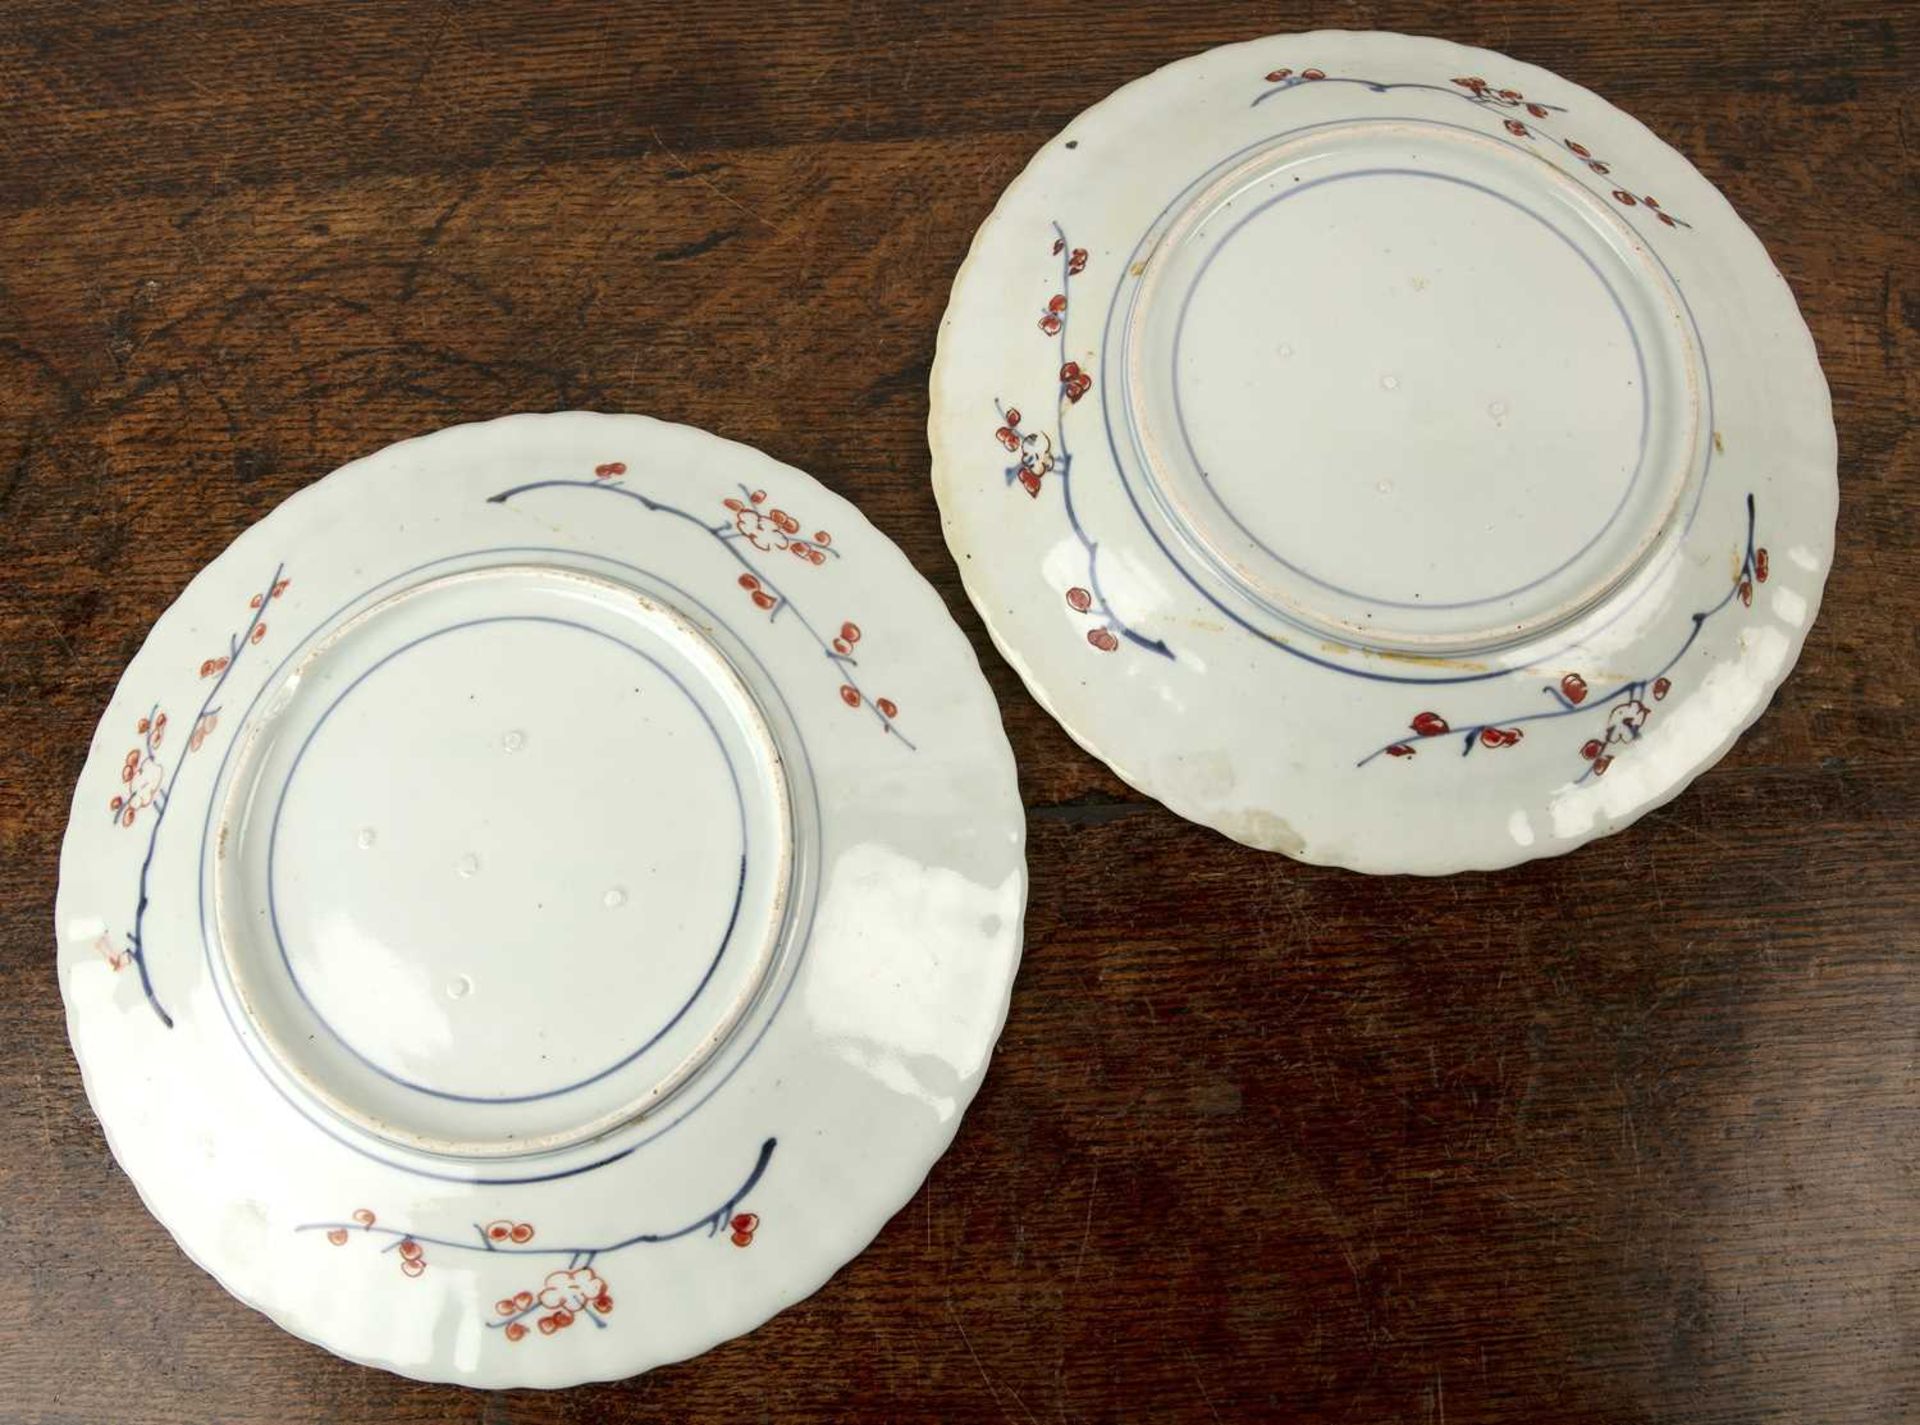 Pair of Japanese Imari patterned porcelain plates 19th Century, decorated with flowers, blossom - Image 2 of 2